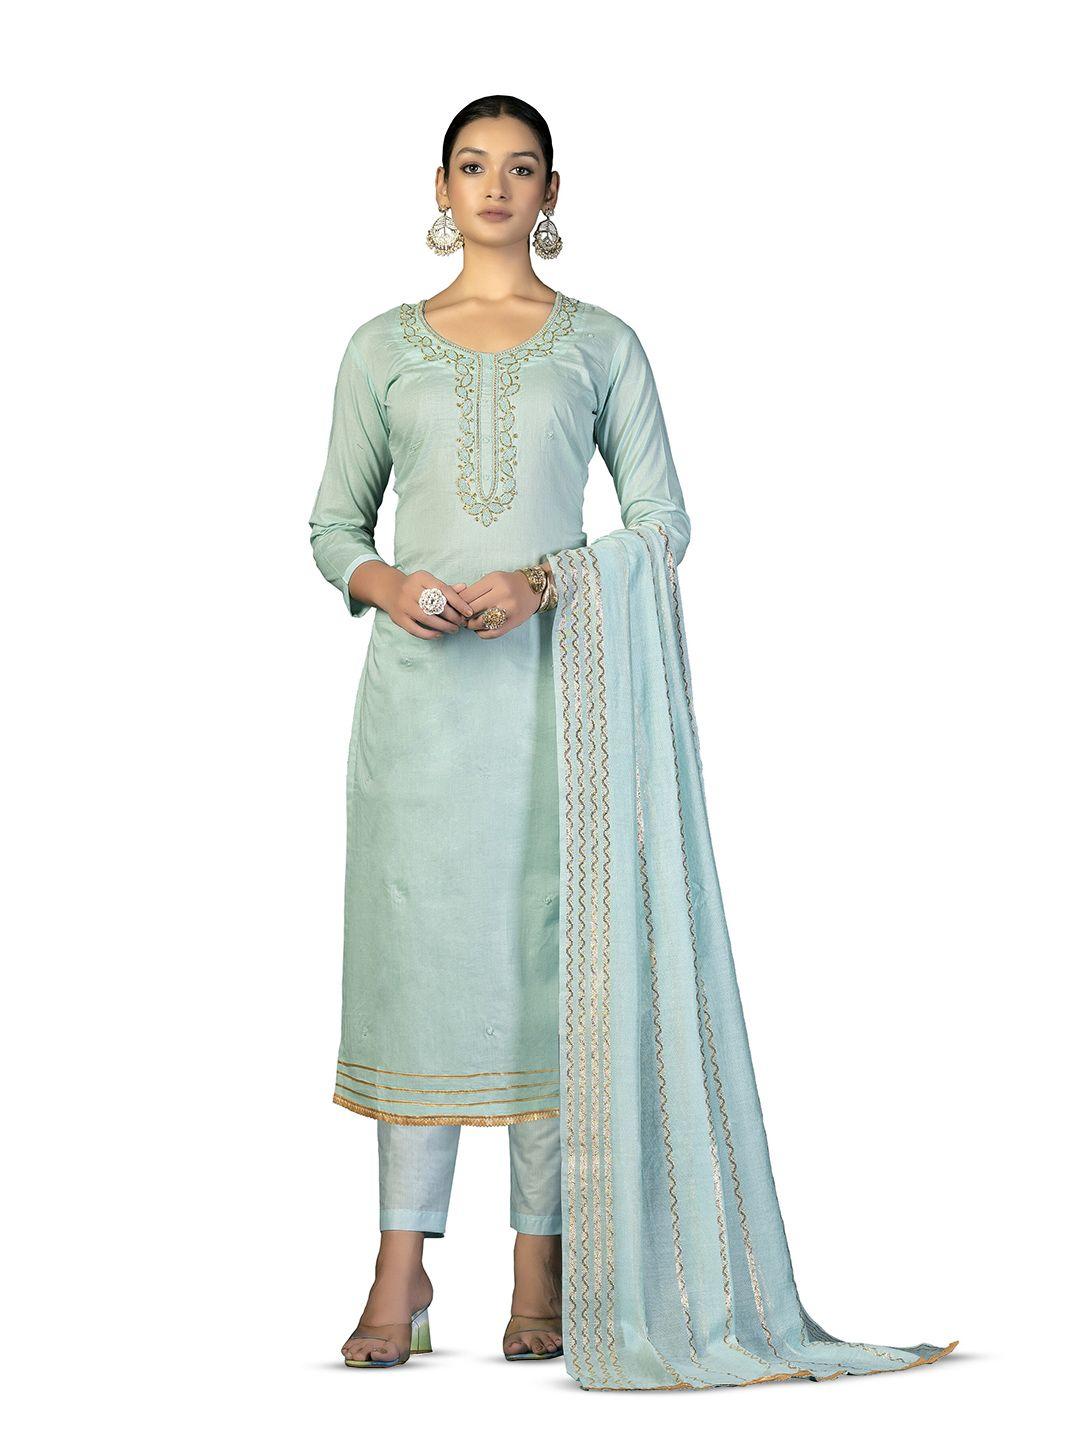 MANVAA Sea Green & Gold-Toned Embroidered Unstitched Dress Material